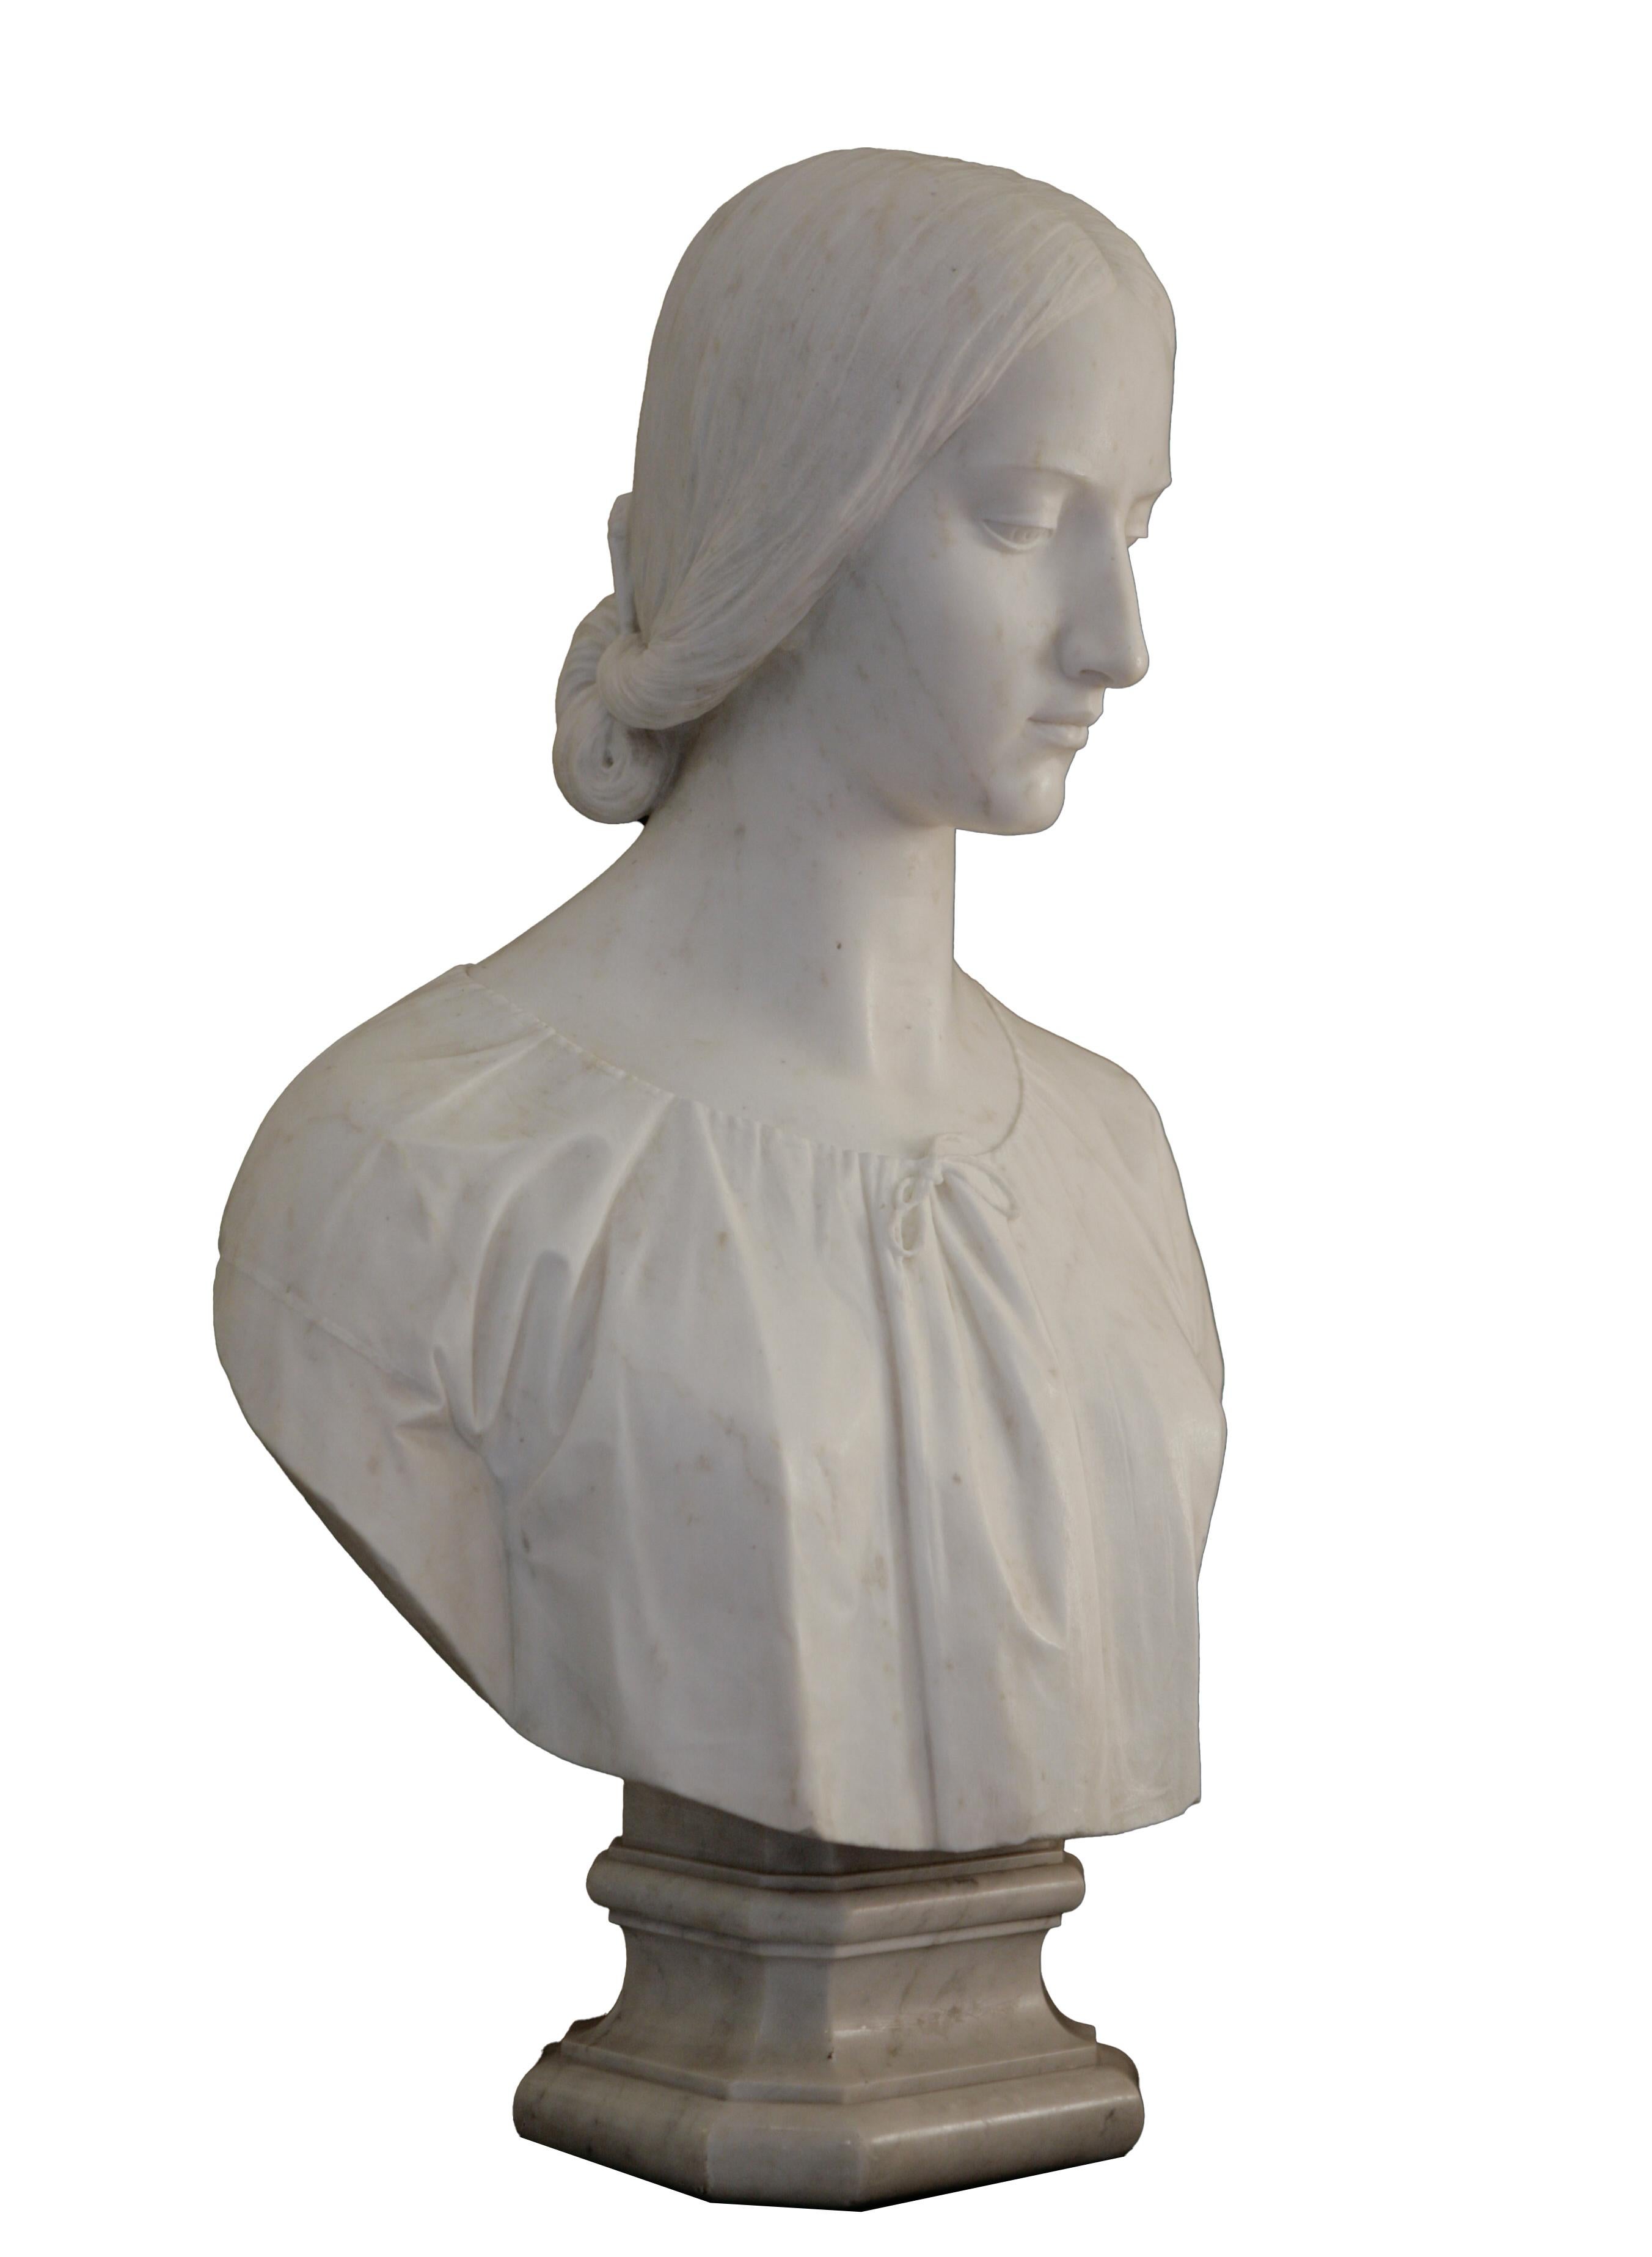 Sculptor active in Italy
Marble sculpture depicting study of female beauty
Second half of the 19th century
Measurements: 46x26 cm - height 74 cm

Great state of conservation
We ship worldwide in custom-made wooden crates.
All items are accompanied